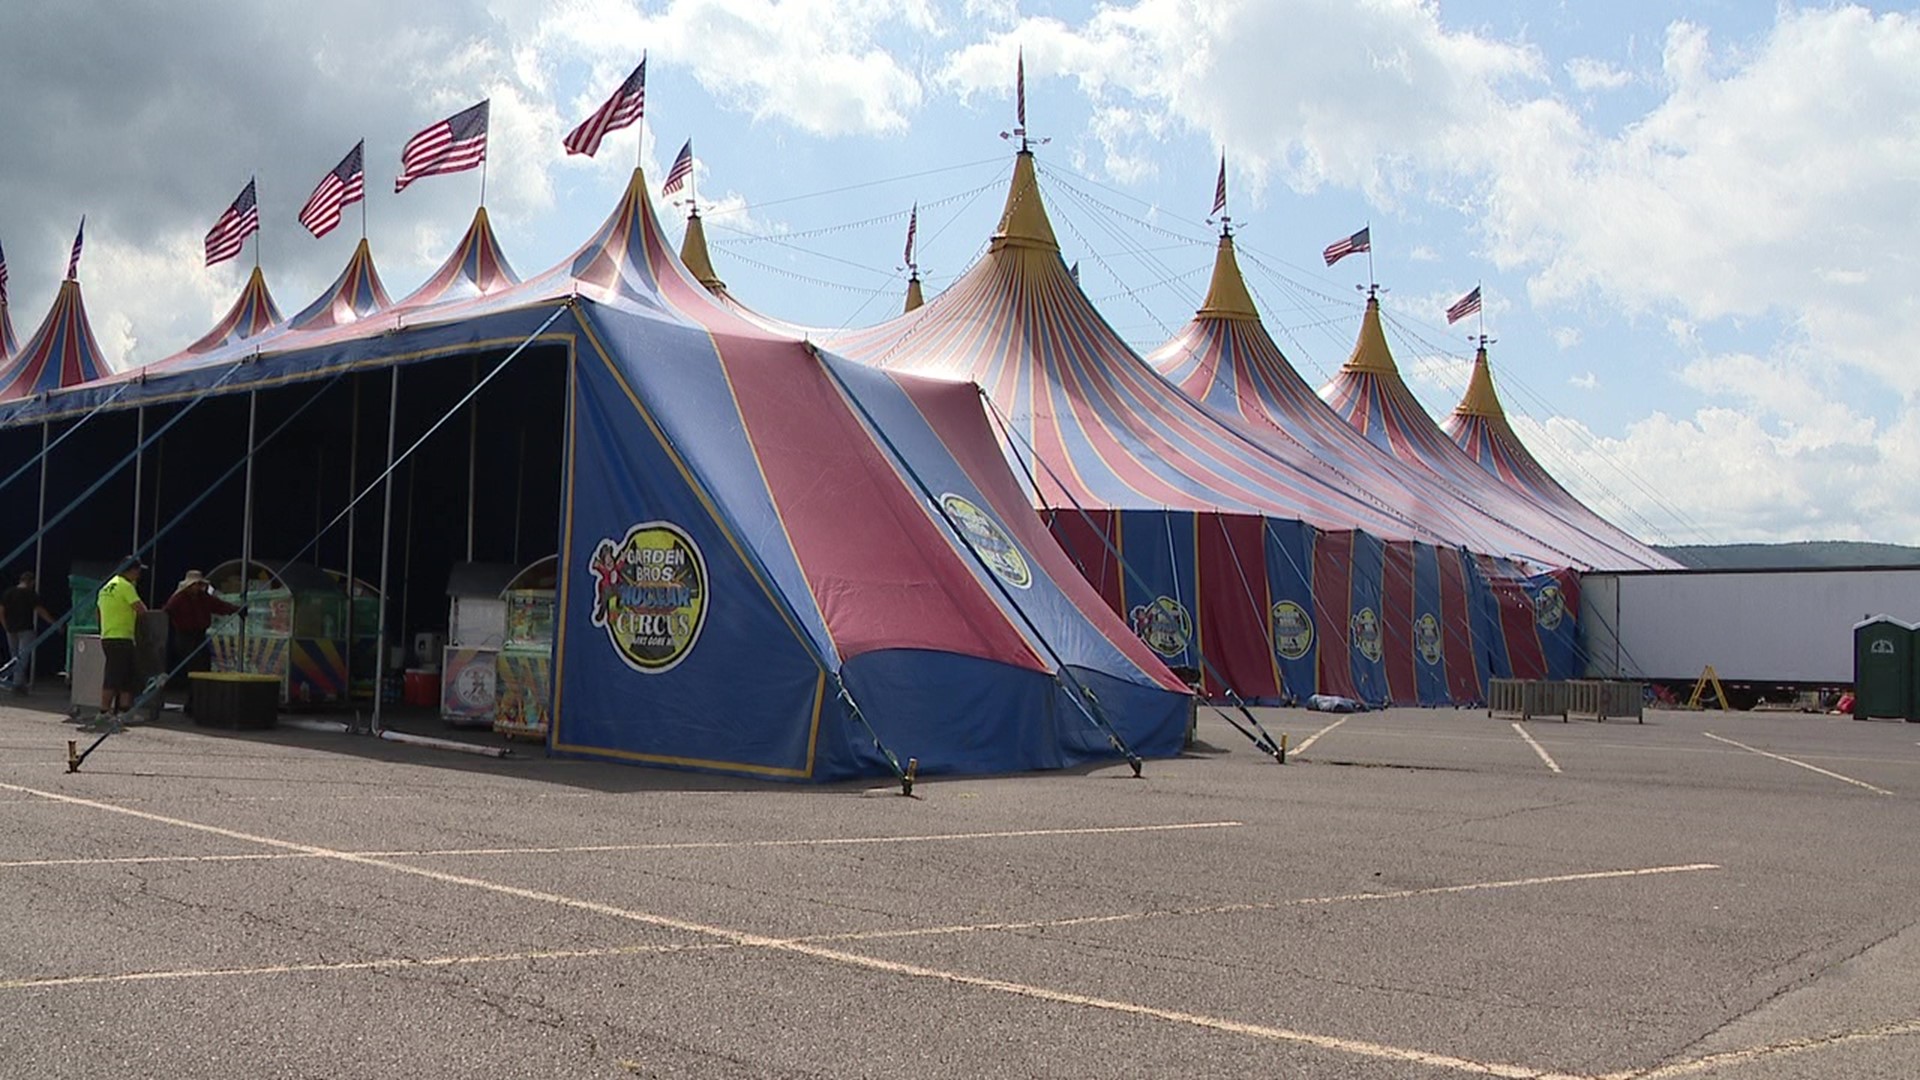 Newswatch 16's Melissa Steininger takes us under the big top, where they're preparing for a fun-filled weekend.